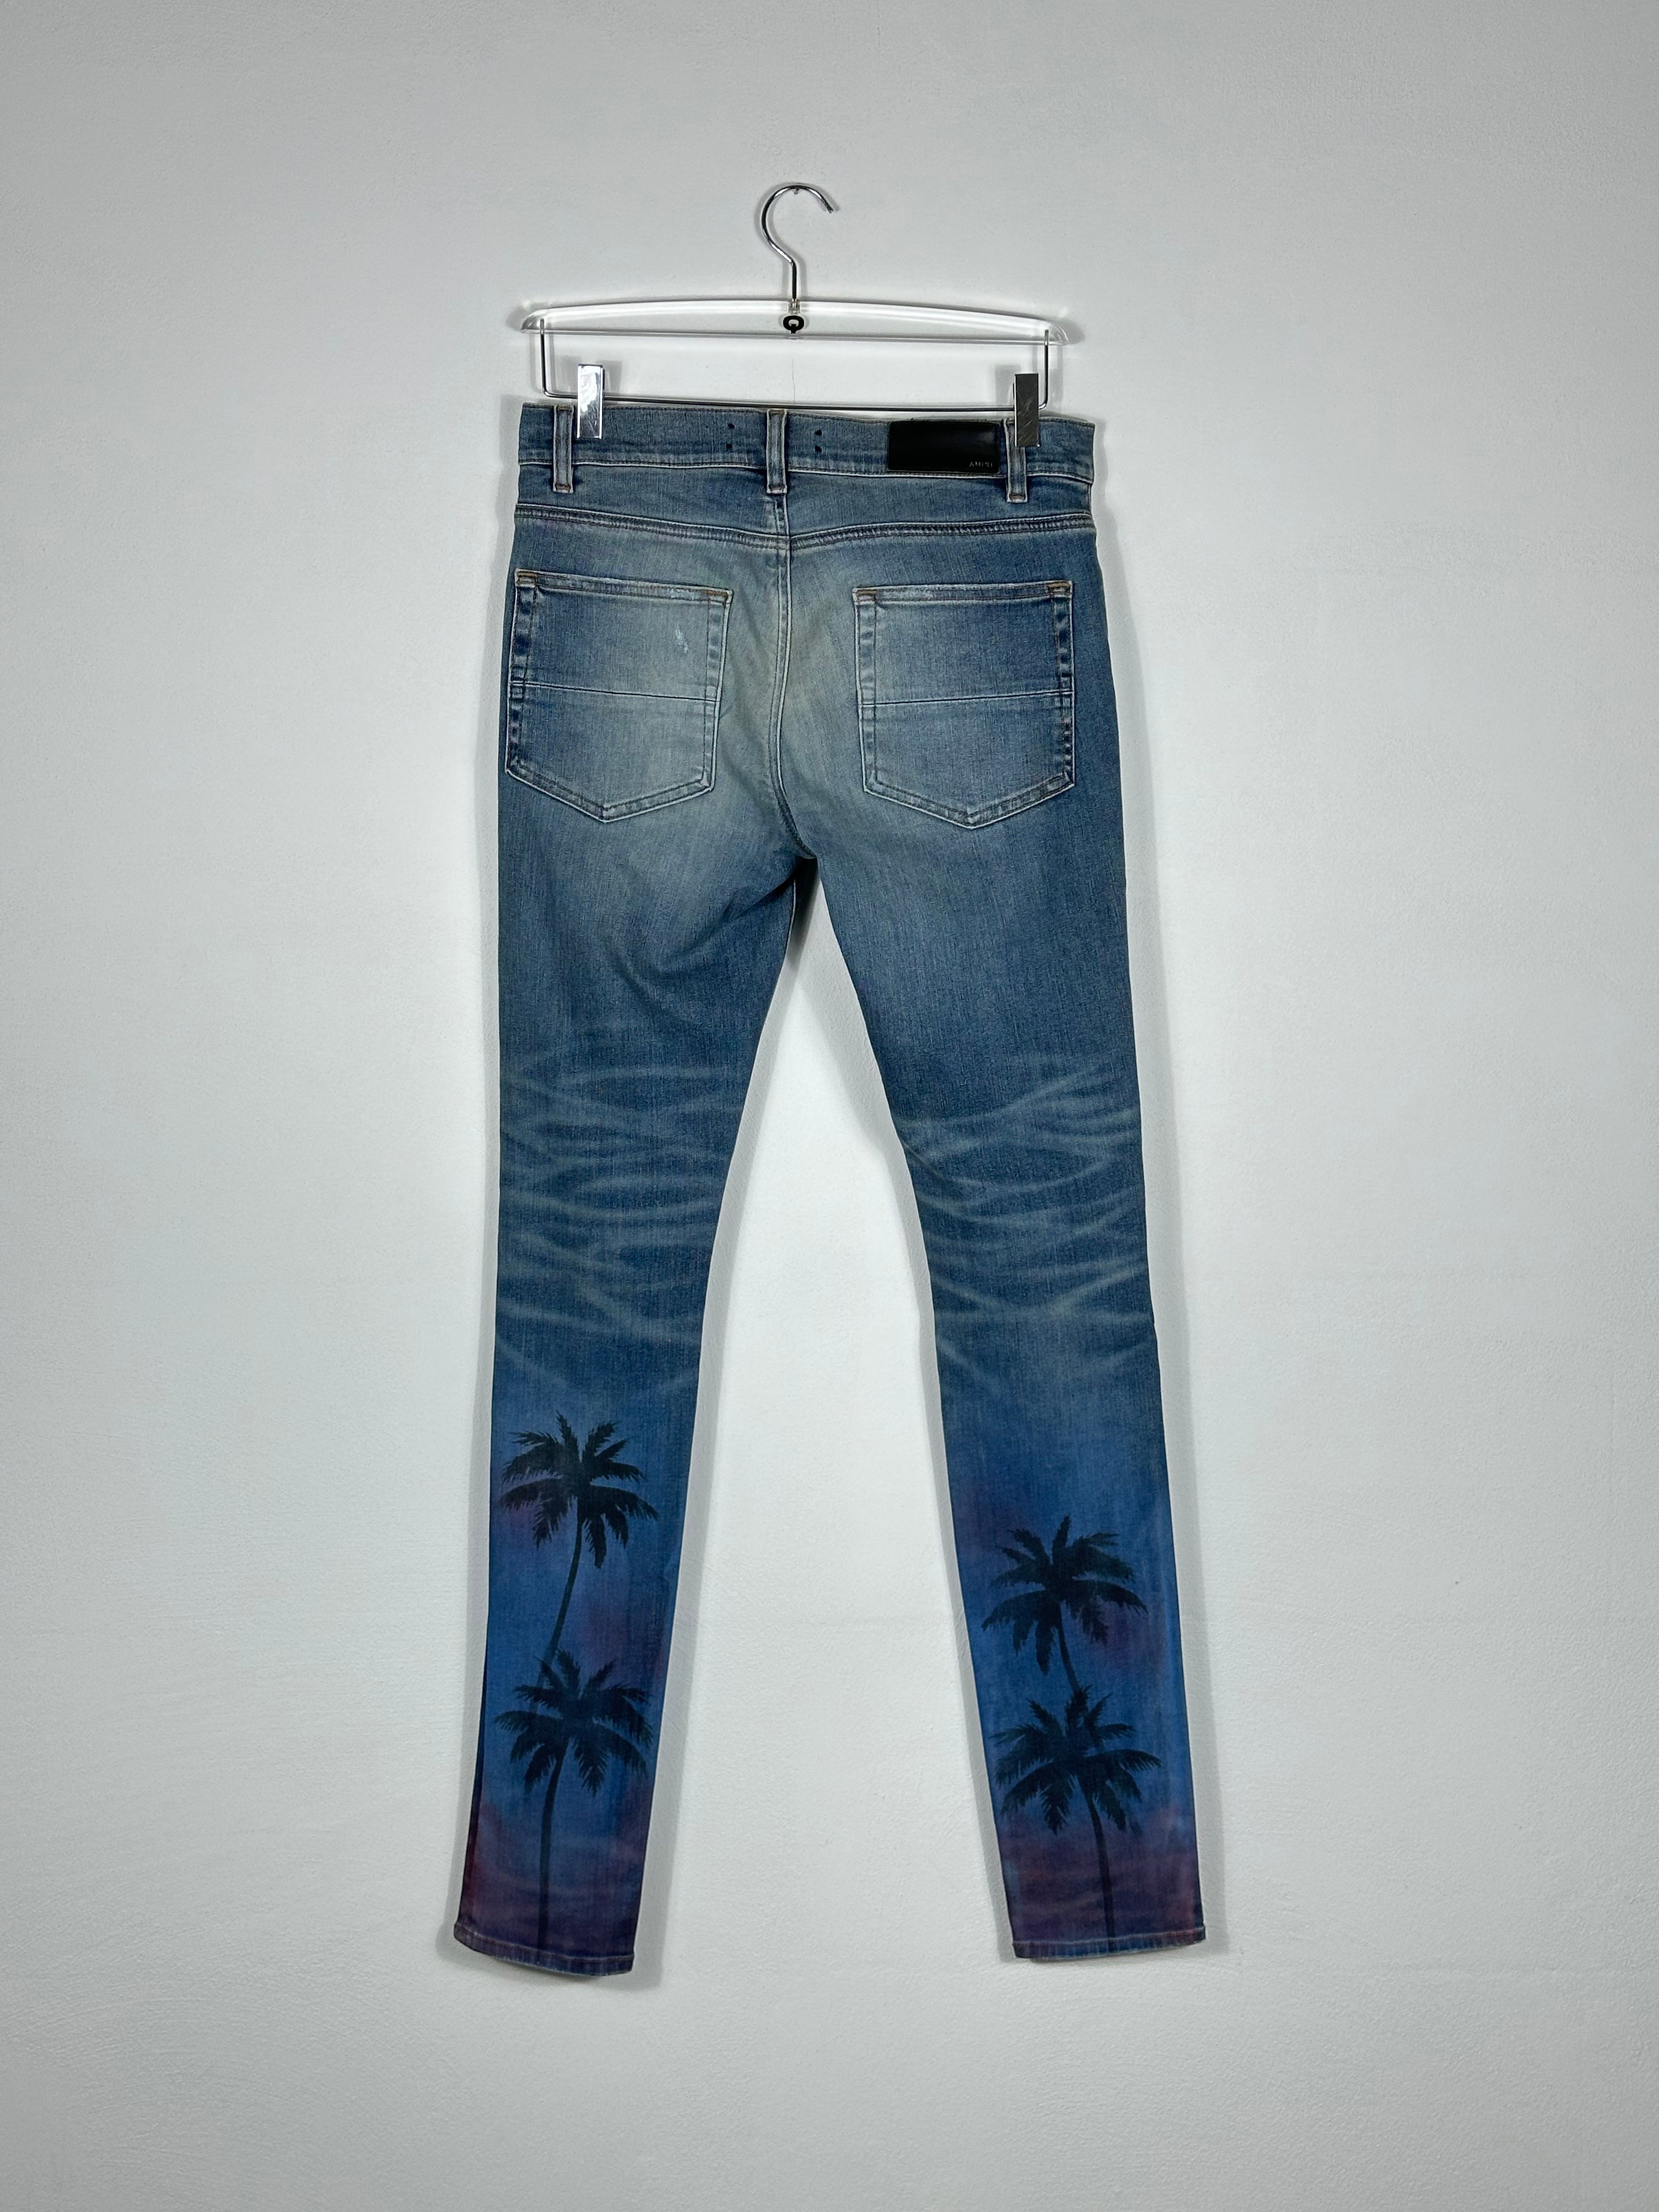 Ripped Jeans With Palms